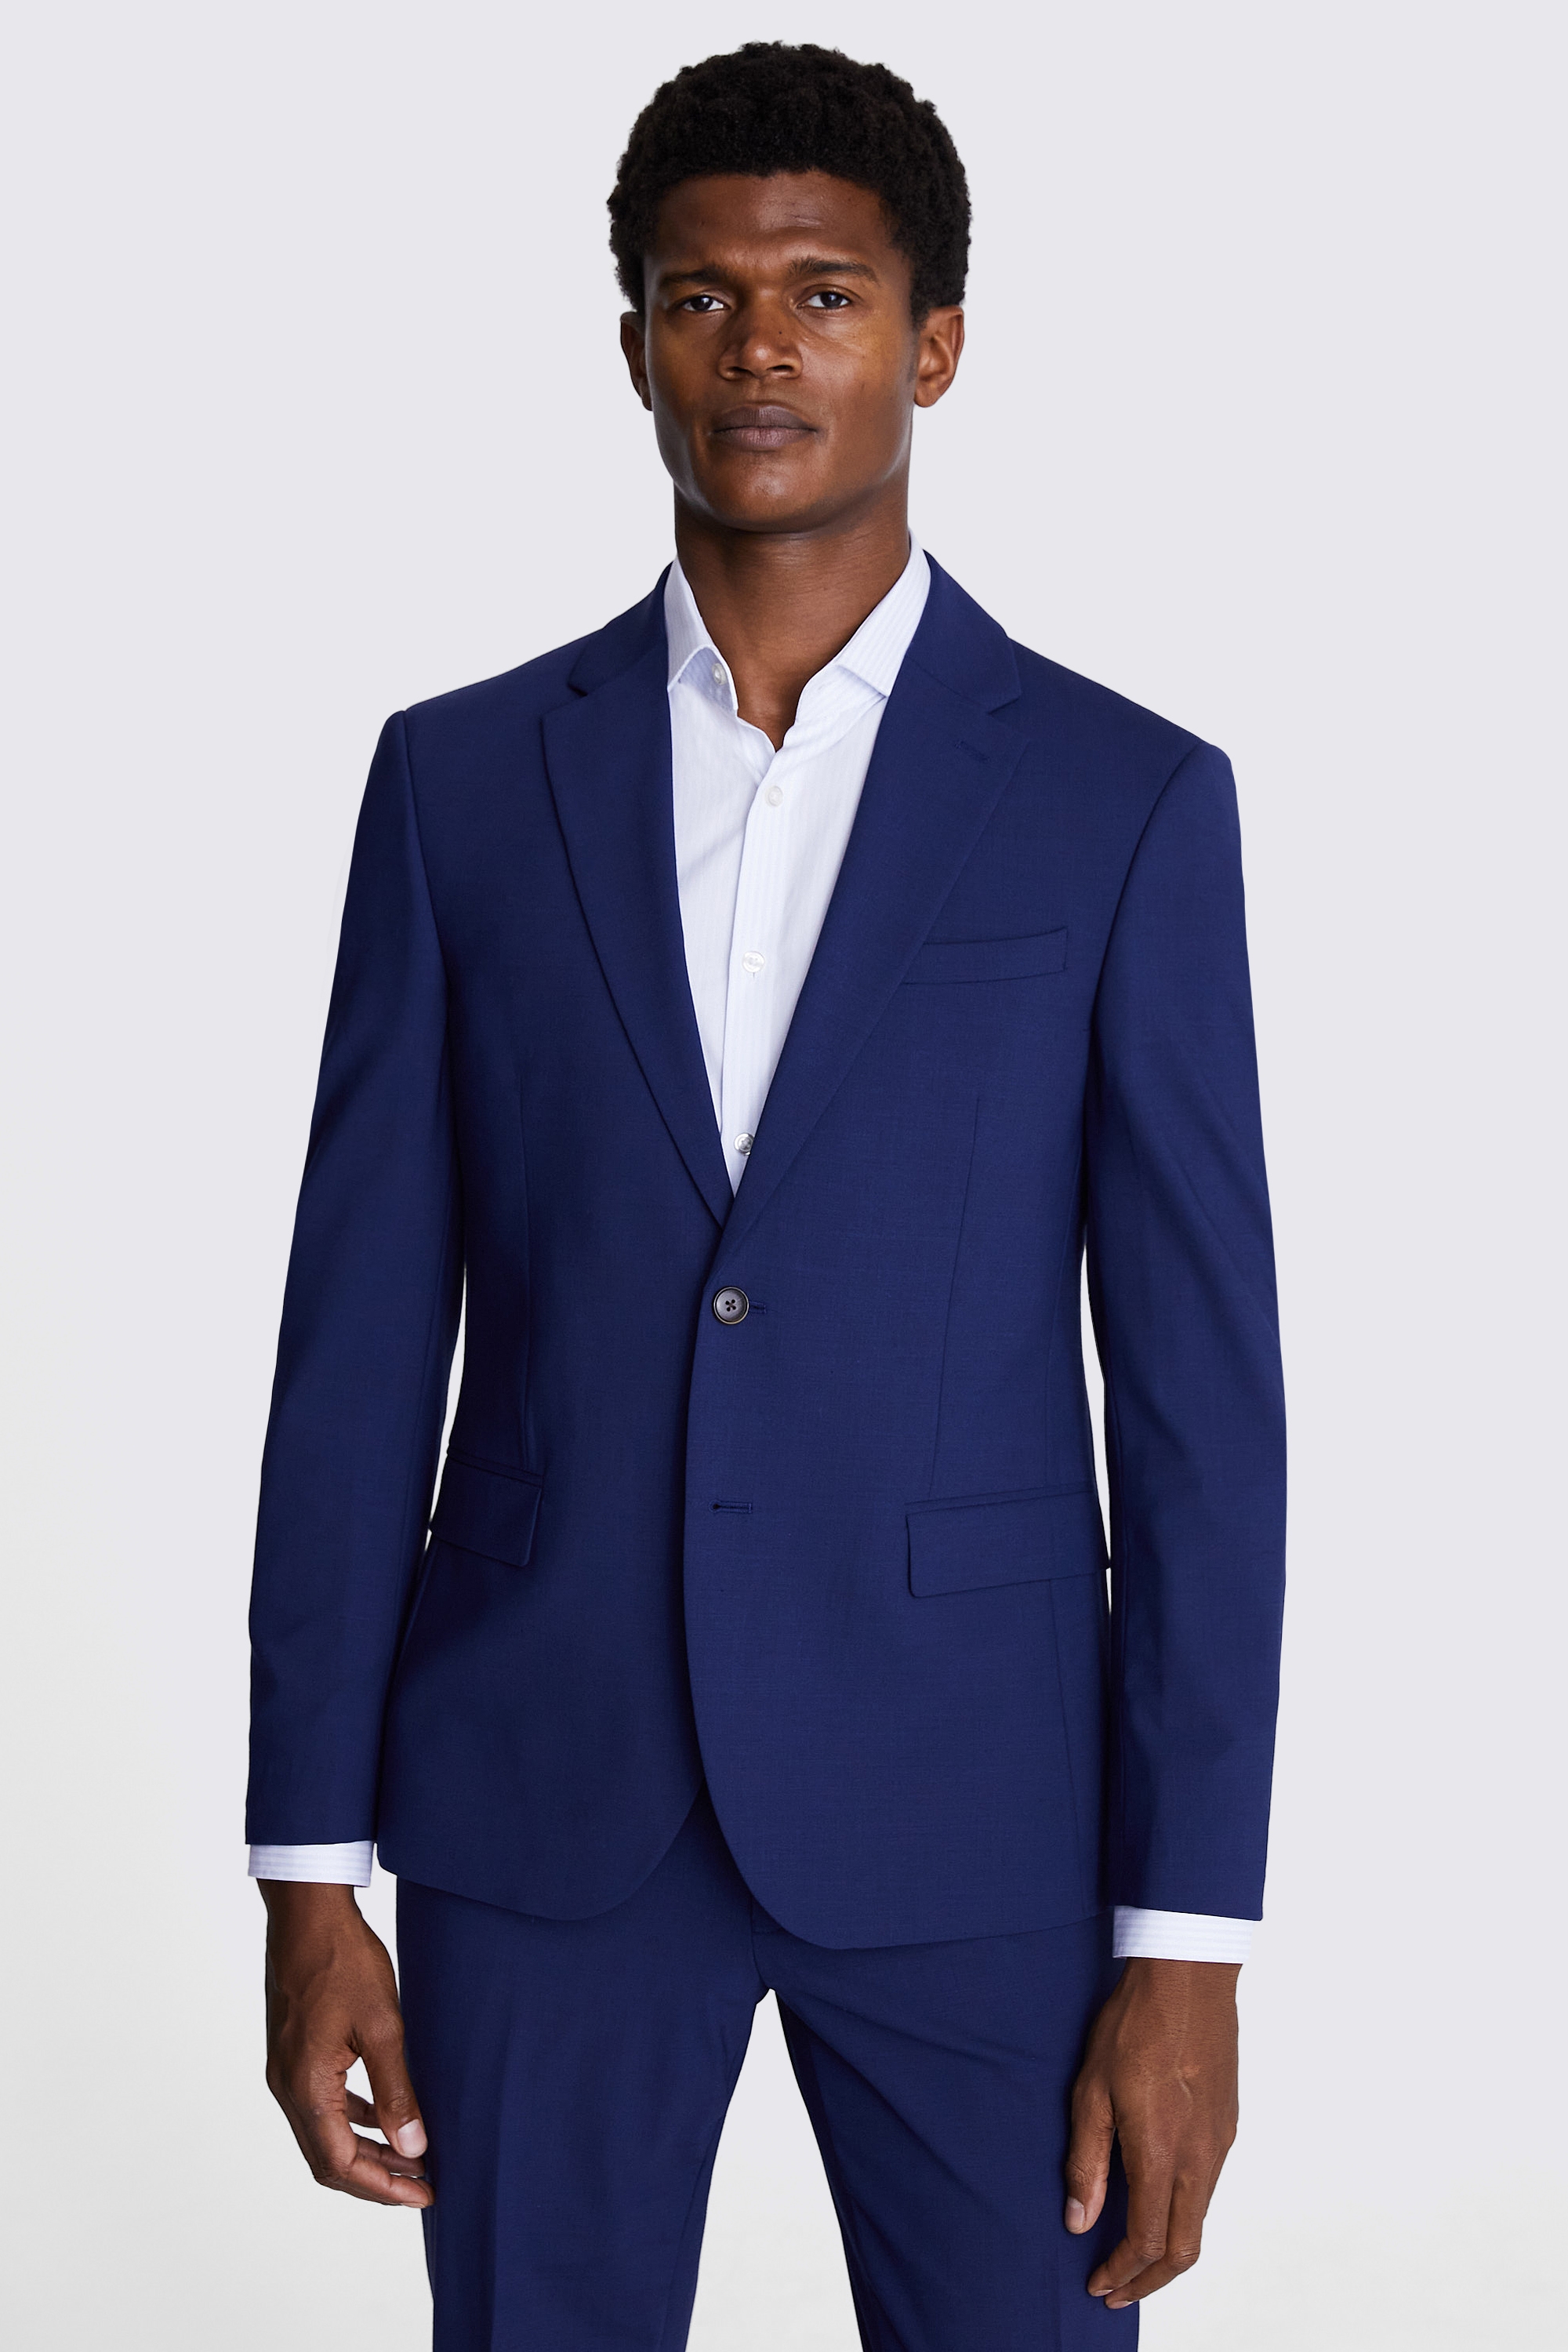 DKNY Slim Fit Bright Blue Jacket | Buy Online at Moss